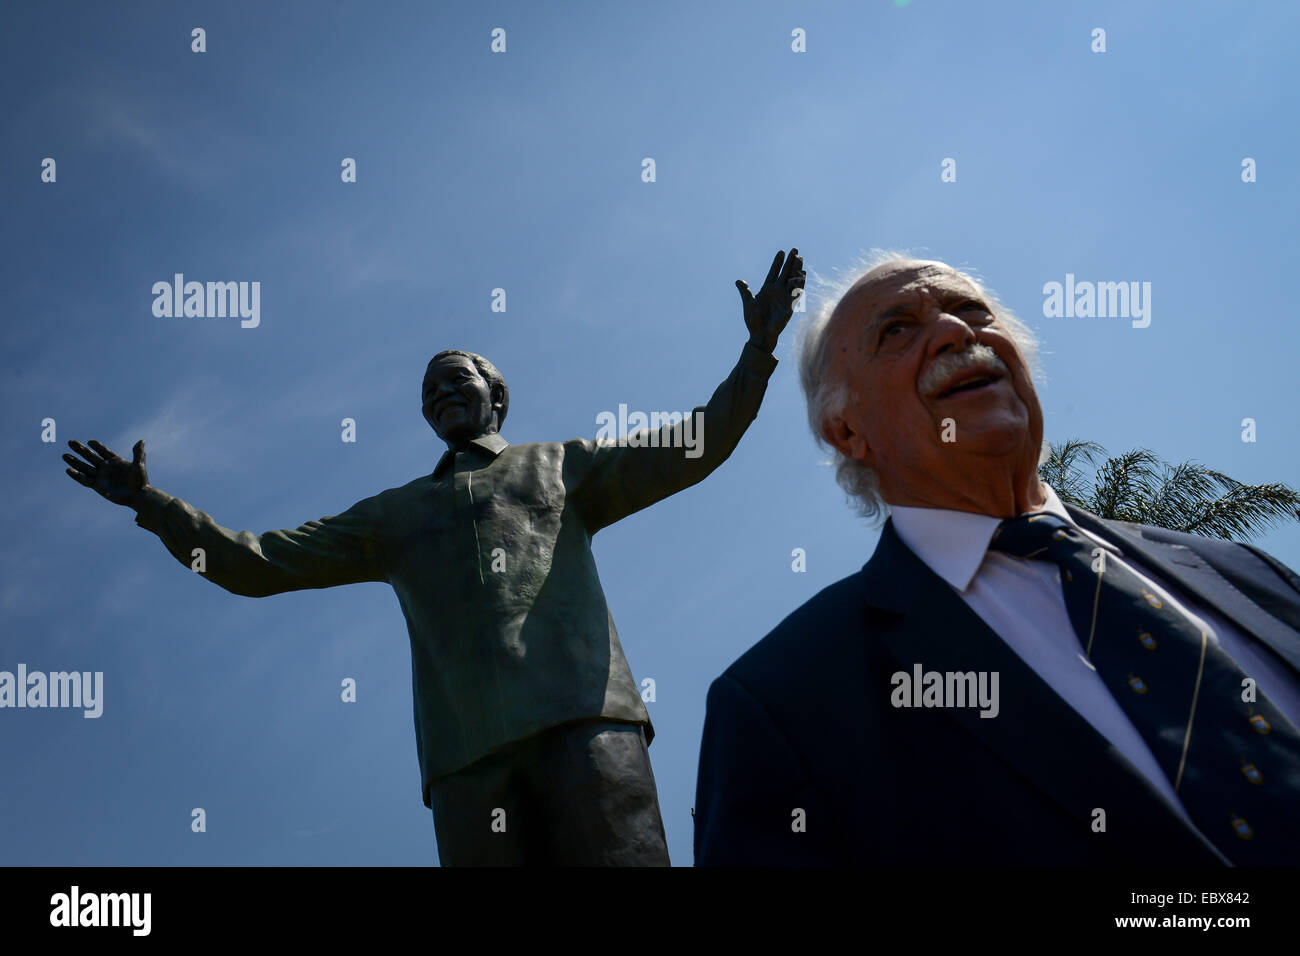 Pretoria. 5th Dec, 2014. The laywer George Bizos, who helped the Nelson Mandela out of prison, stands before the Mandela statue in the Union Buildings, Pretoria, South Africa, on Dec.5, 2014. A wreath laying ceremony was held here Friday to mark the 1st anniversary of late South Africa's President Nelson Mandela's passing. South Africa's veterans of the struggle for freedom and those who fought with Nelson Mandela against apartheid were invited to lead the wreath laying. Credit:  Zhai Jianlan/Xinhua/Alamy Live News Stock Photo